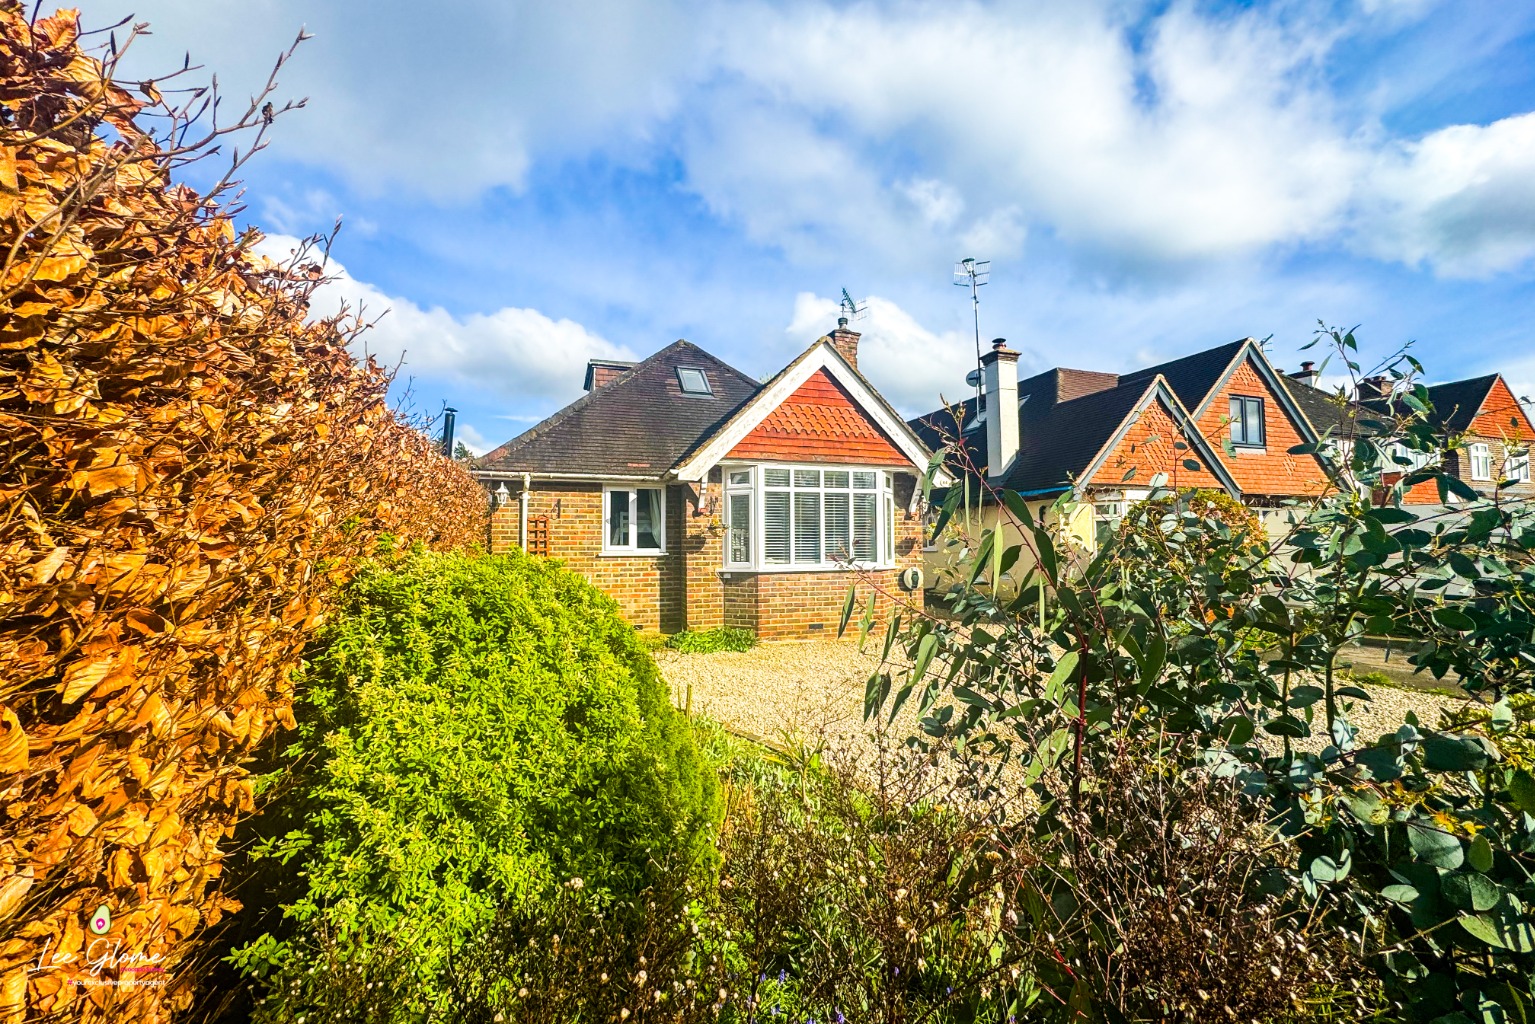 3 bed detached house for sale in New Road, Guildford - Property Image 1